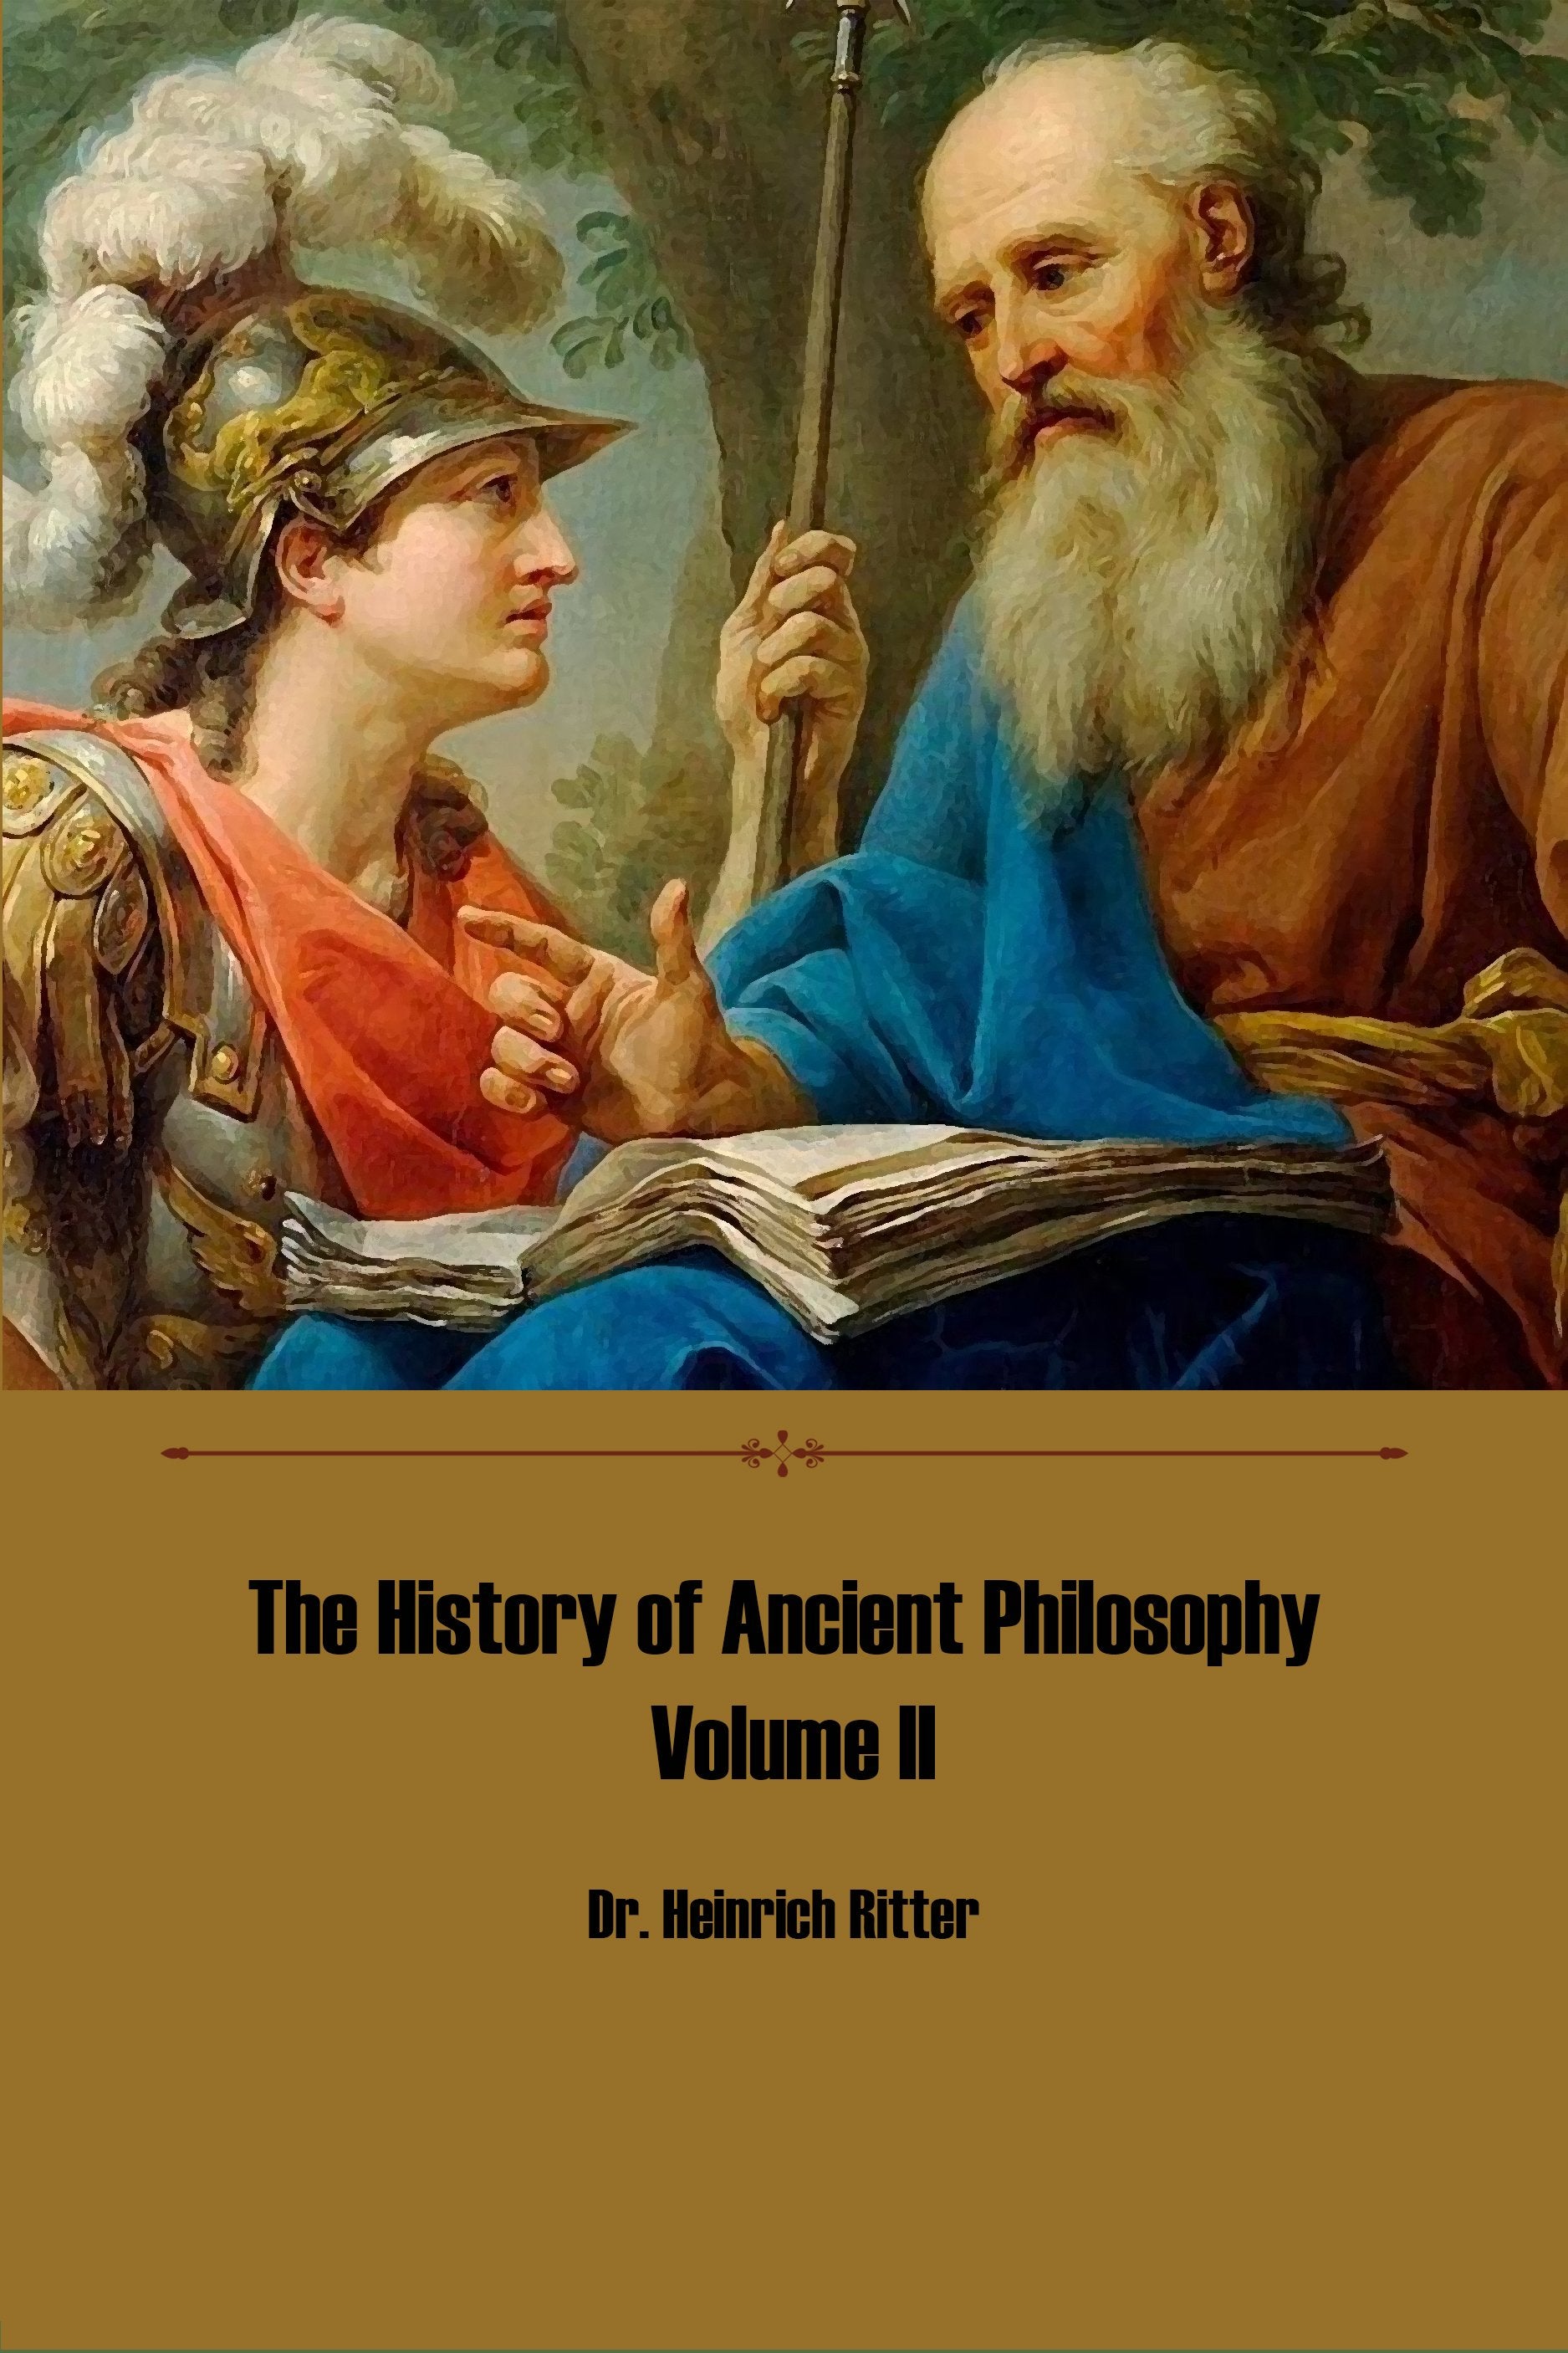 The History of Ancient Philosophy Volume II